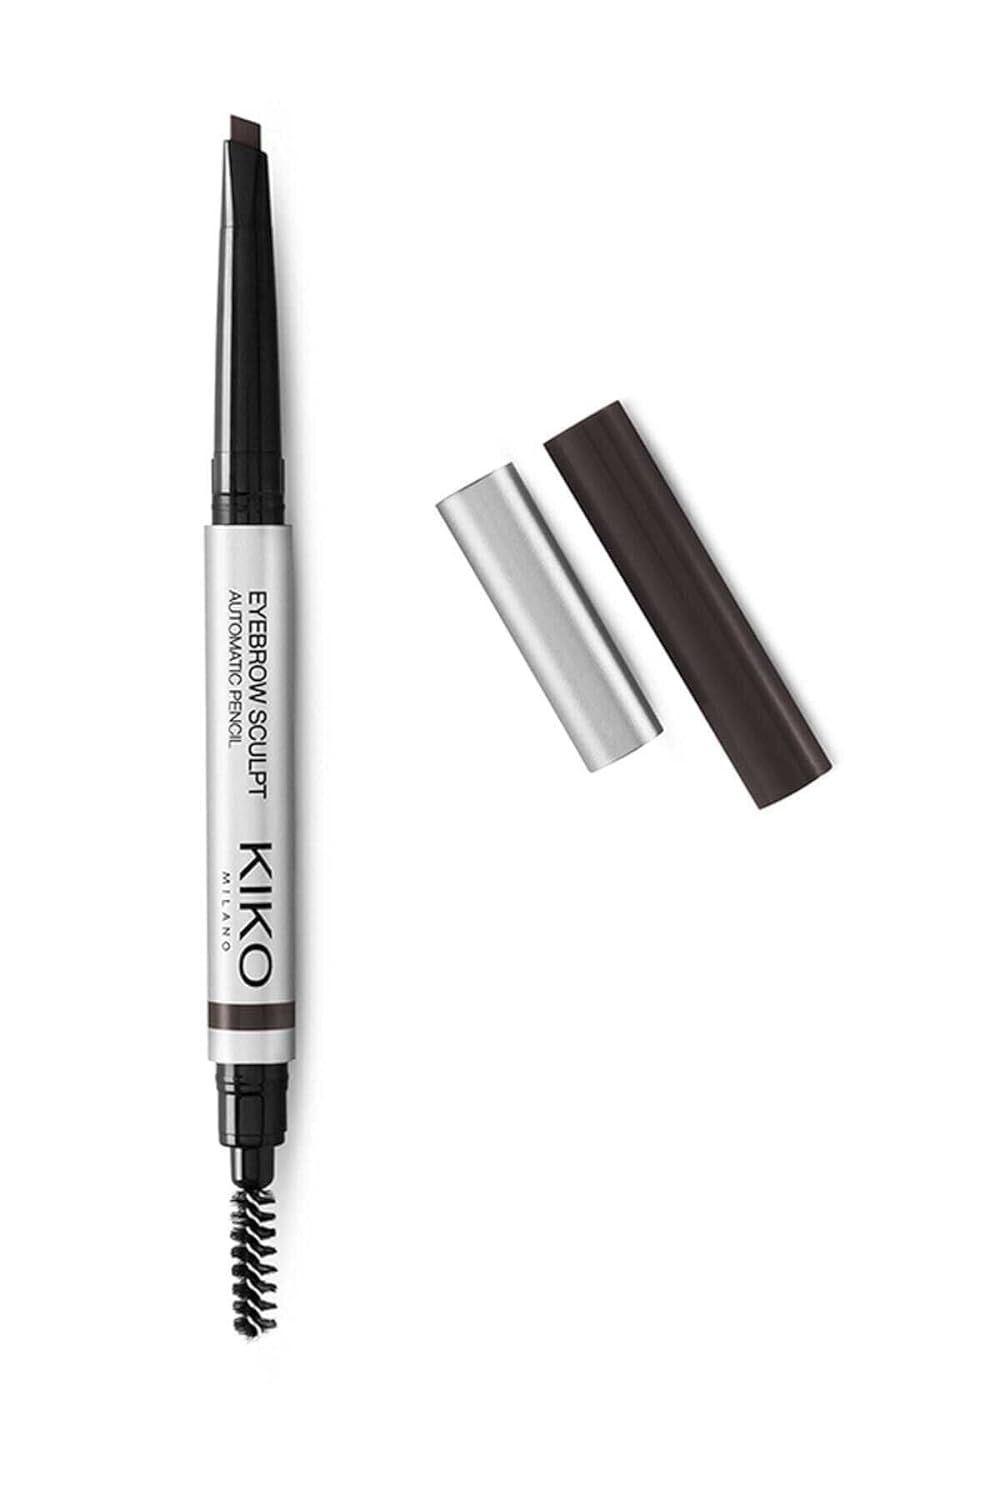 KIKO MILANO - Eyebrow Sculpt Automatic Brown Eyebrow Pencil For Sculpted Eyebrows | 06 Blackhaired | Hypoallergenic Brow Liner | Cruelty Free Makeup | Professional Makeup | Made in Italy